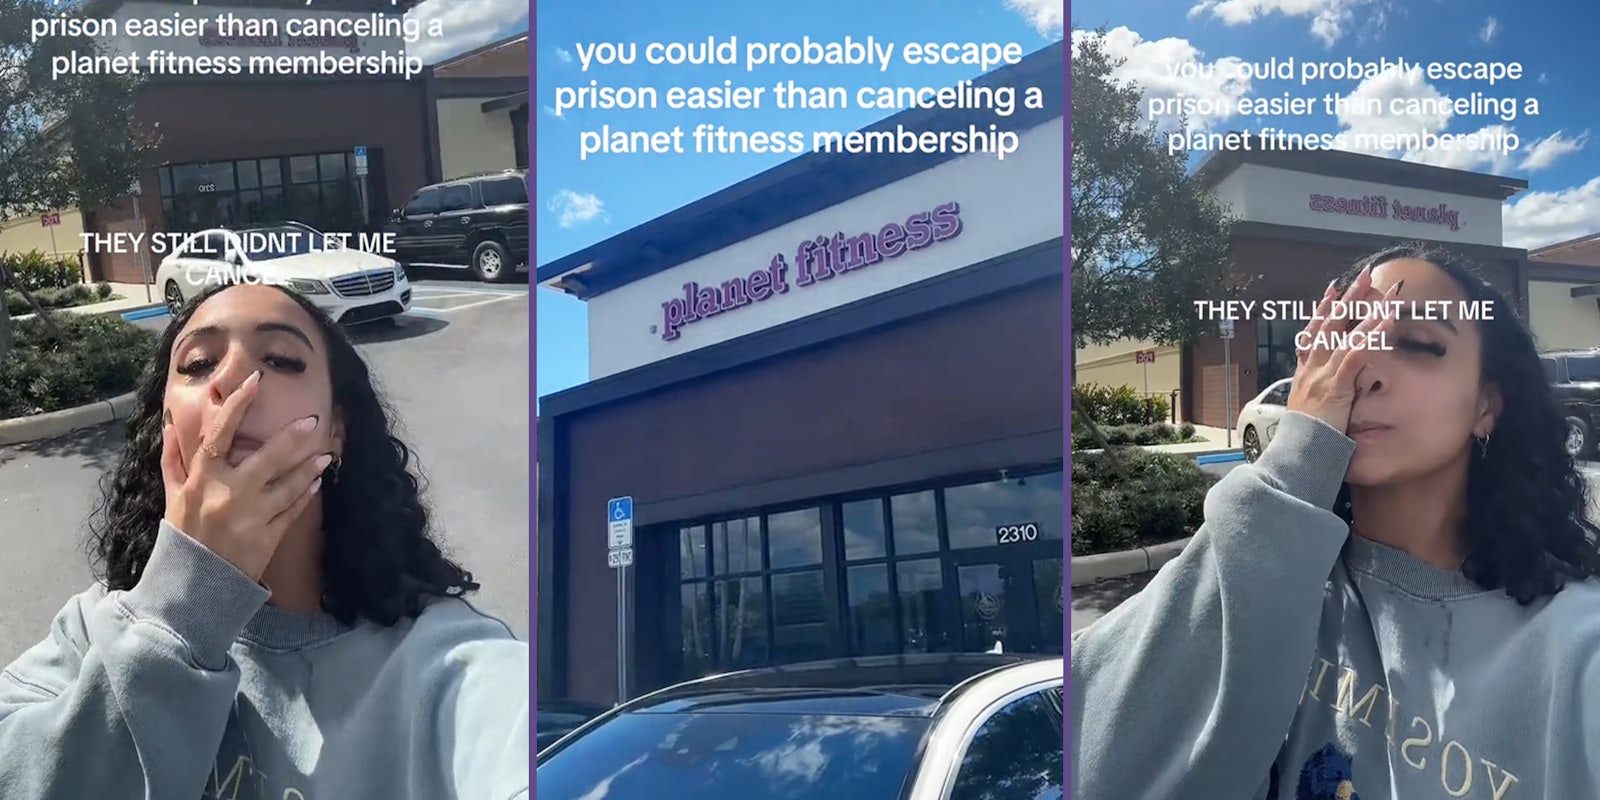 Planet Fitness member tries to cancel membership, they won't let her